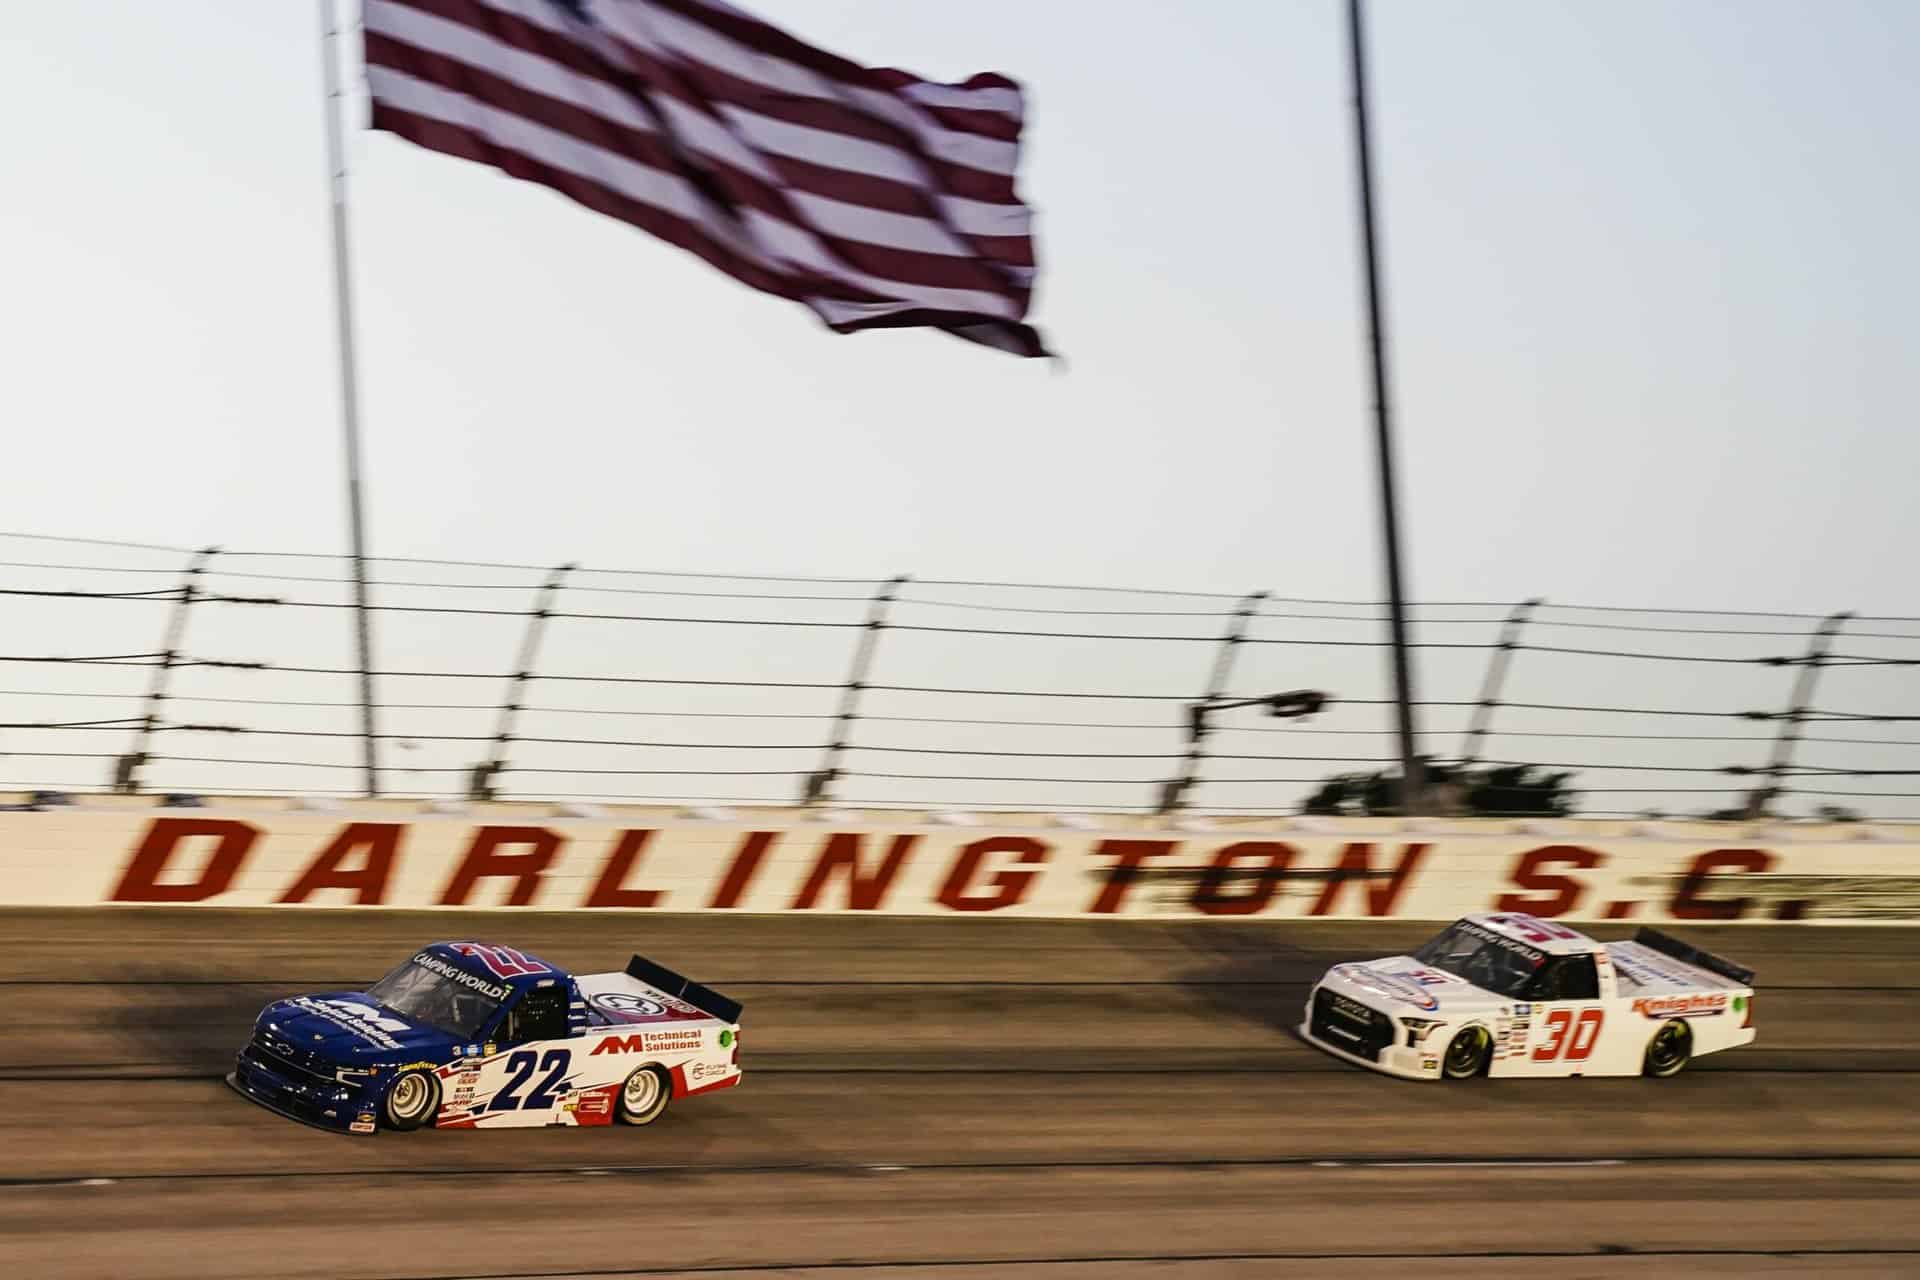 Austin Wayne Self races at Darlington Raceway in the Dead On Tools for AM Racing in the NASCAR Camping World Truck Series.